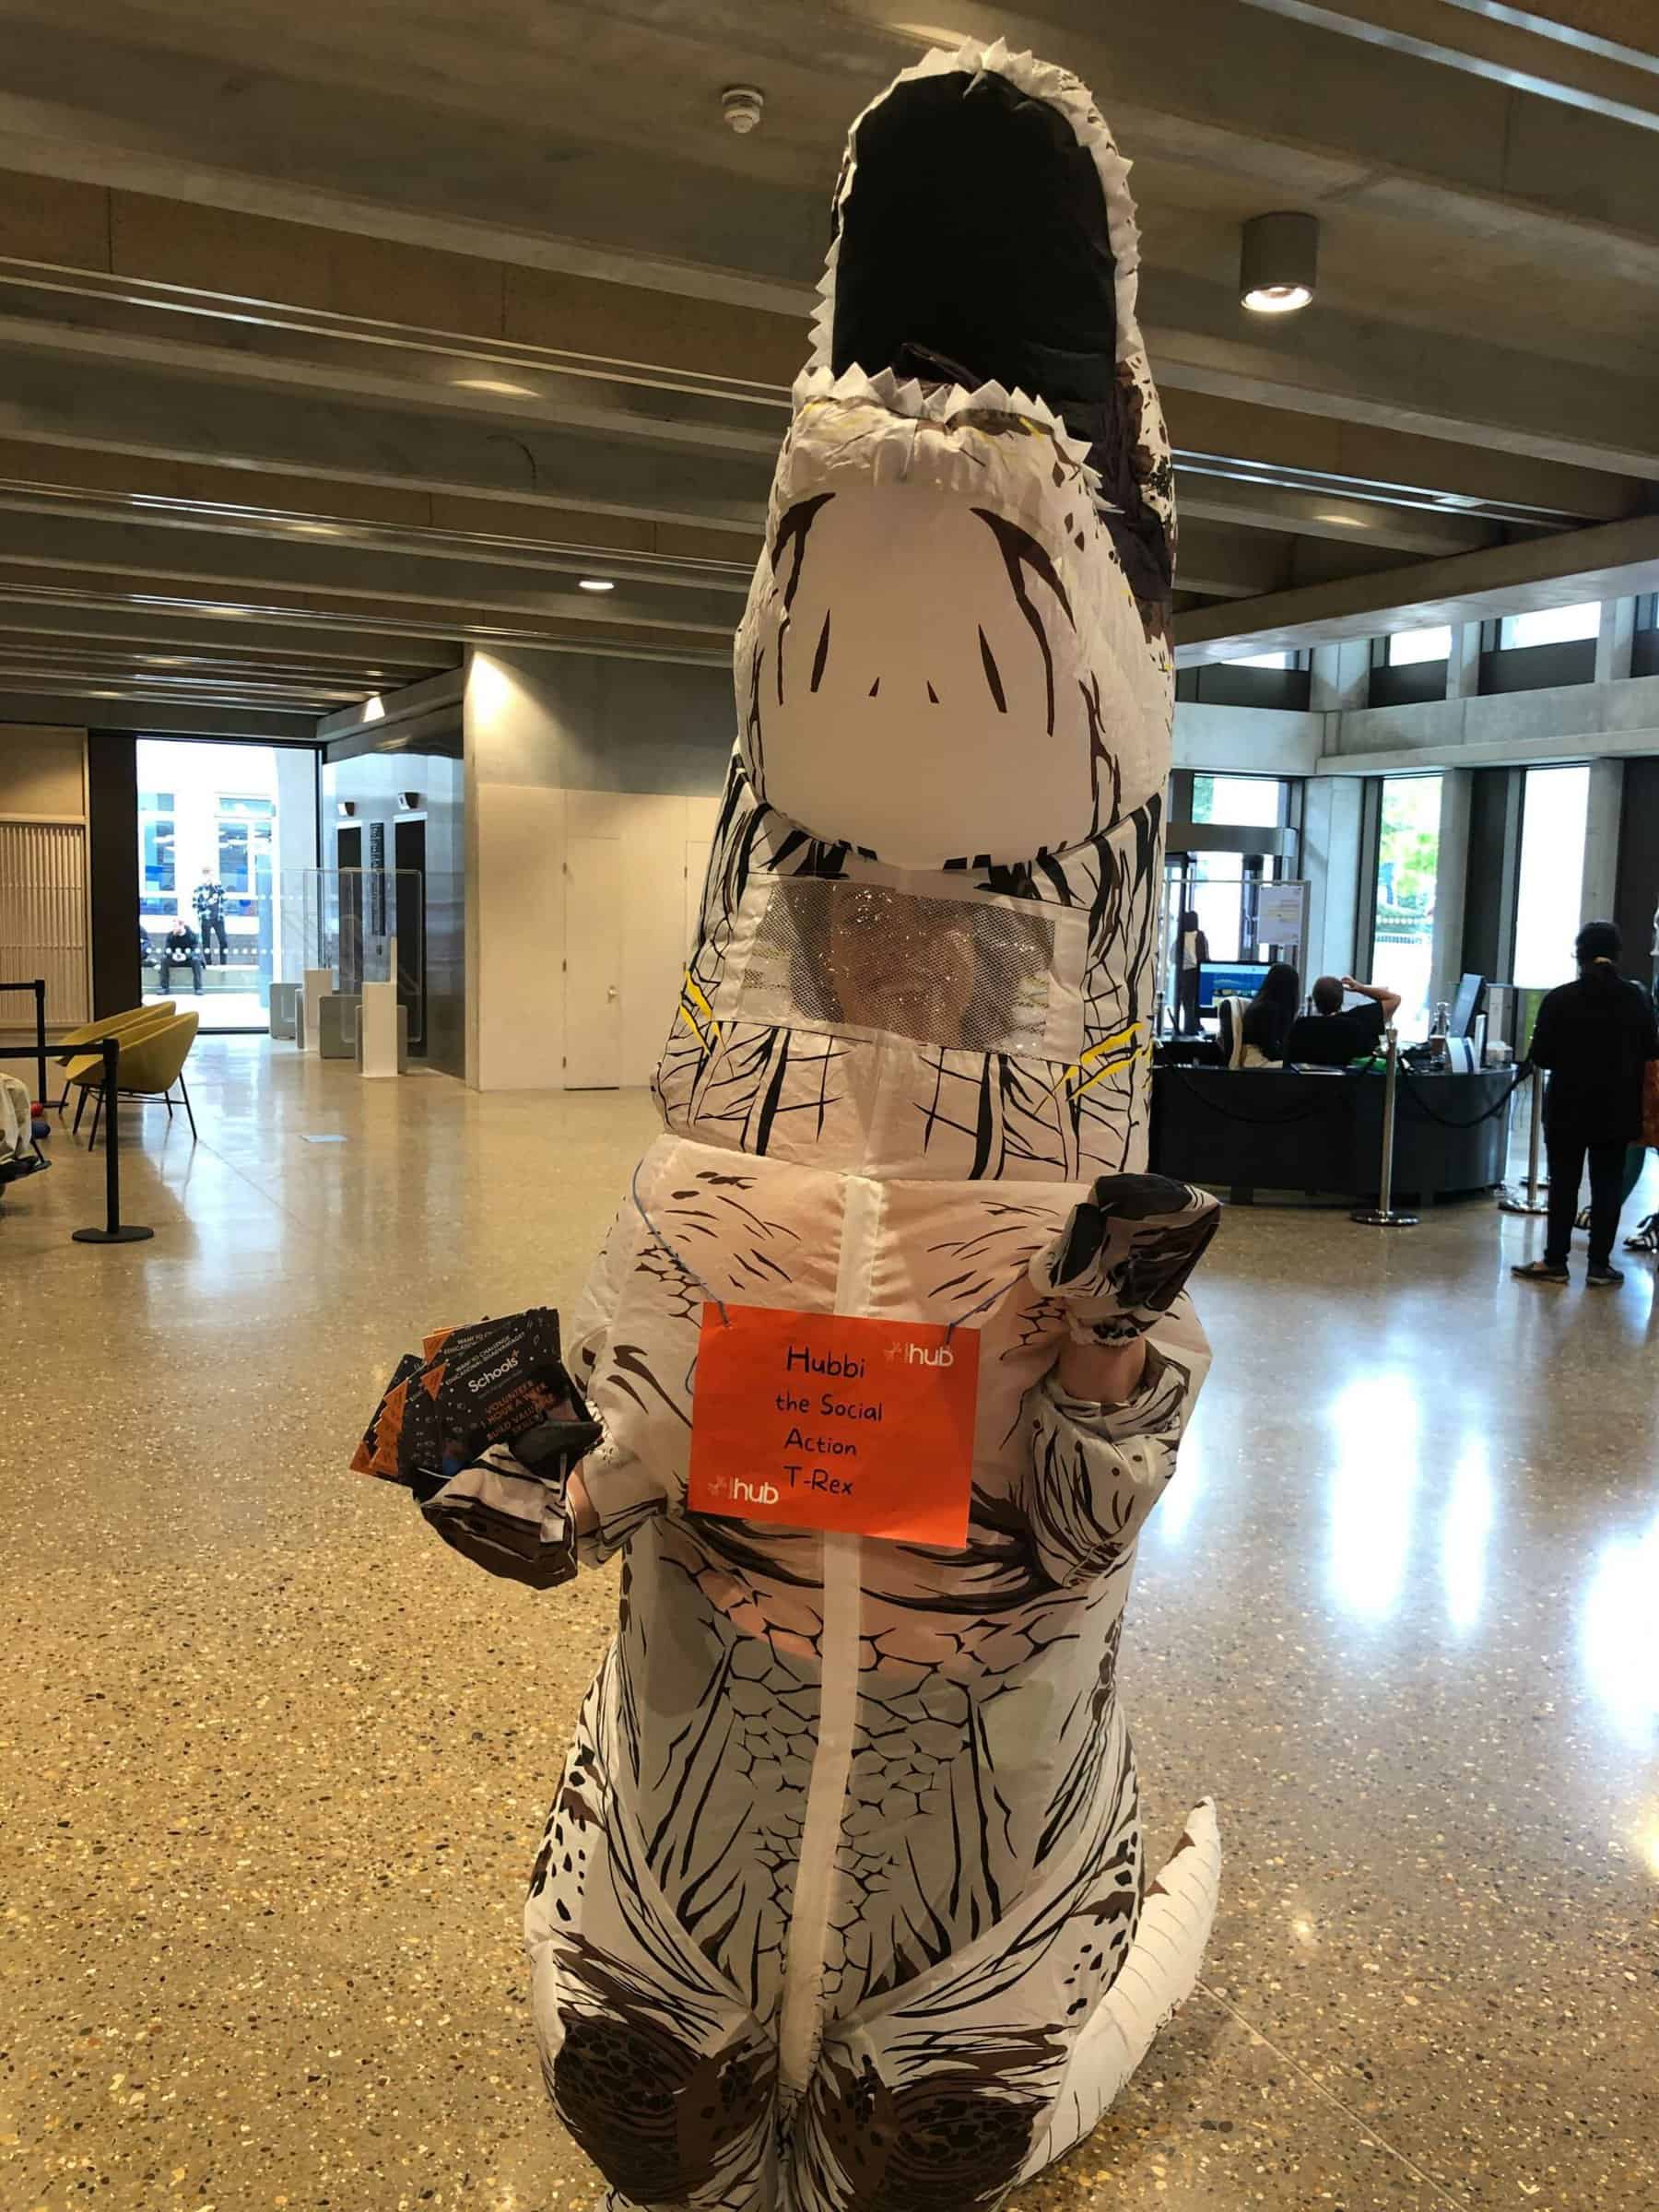 Kingston Hub Staff Member wearing a T-Rex suit with a tag around their neck with the writring 'Hubbi The Social Action T-Rex'